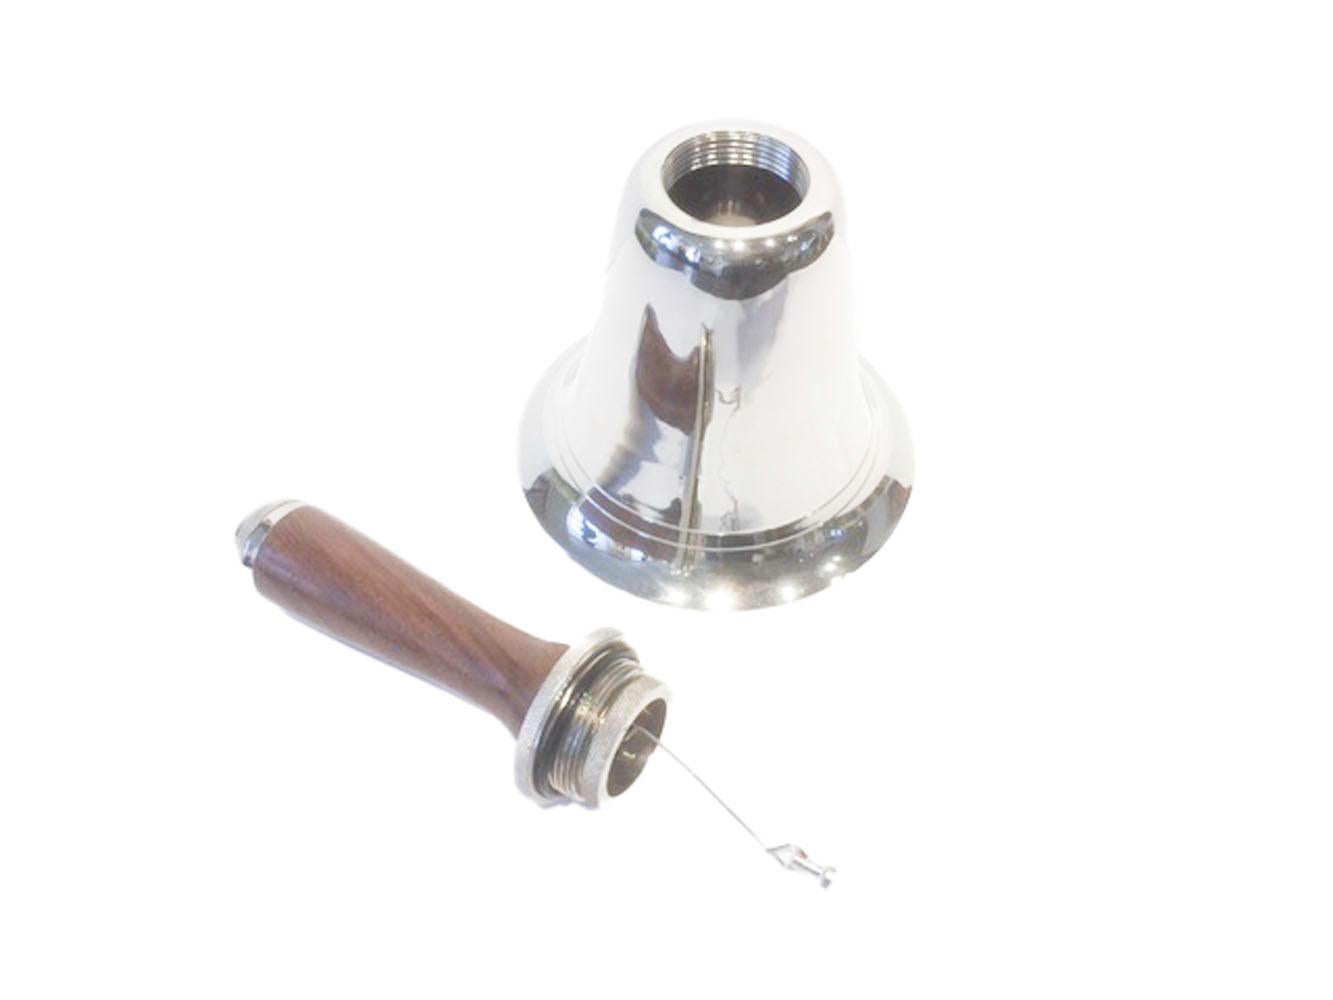 Vintage chrome and wood cocktail shaker in the form of a bell. The handle unscrews from the top of the bell allowing you to fill the shaker. The handle has a strainer built in to the screw fitting from which the clapper hangs. Once you've replaced